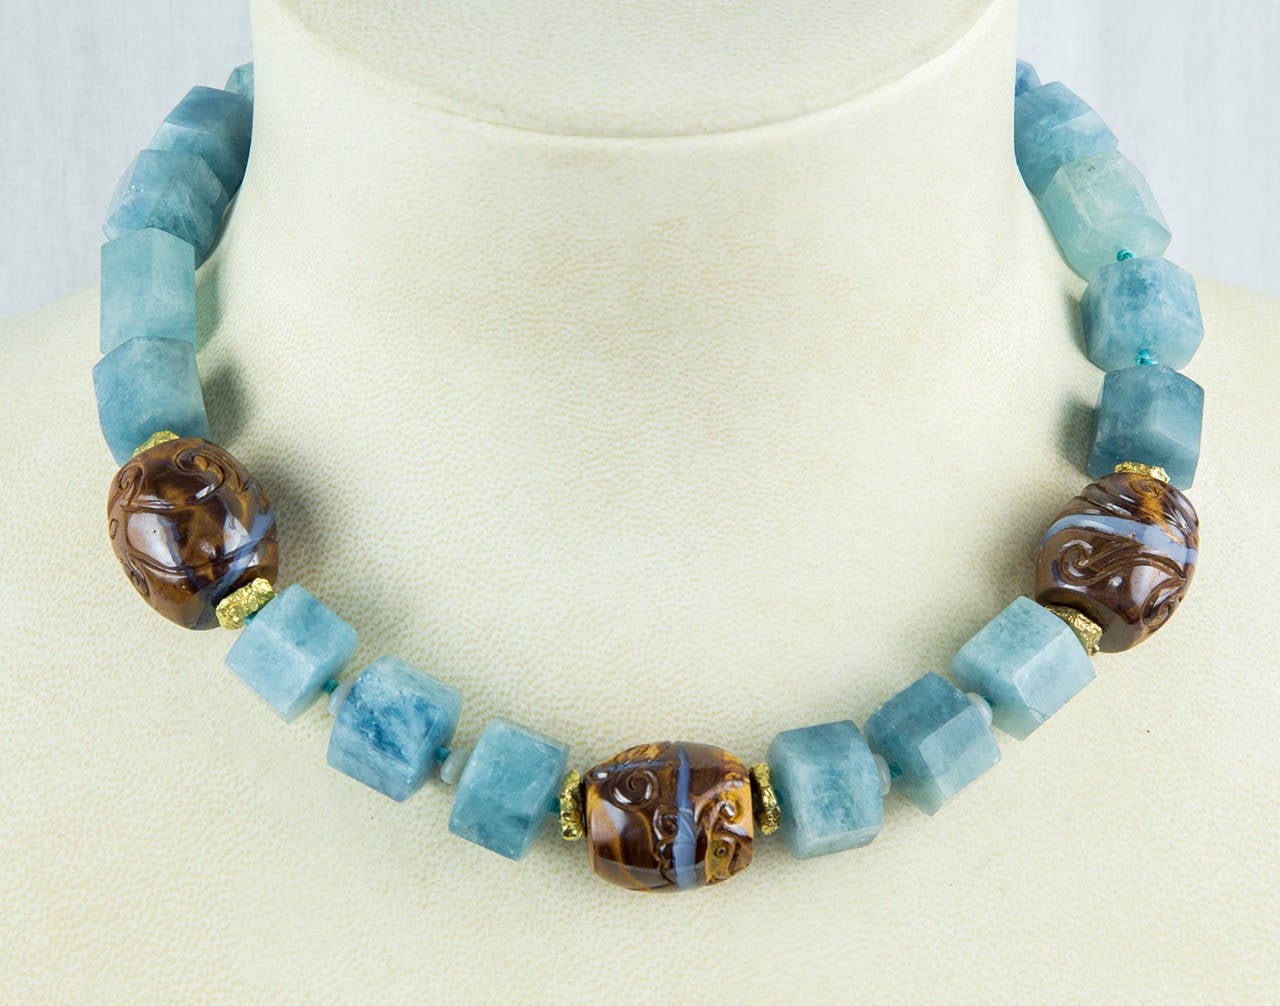 Mixed Cut Aquamarine and Gem Opal in Matrix Beads Statement Necklace For Sale